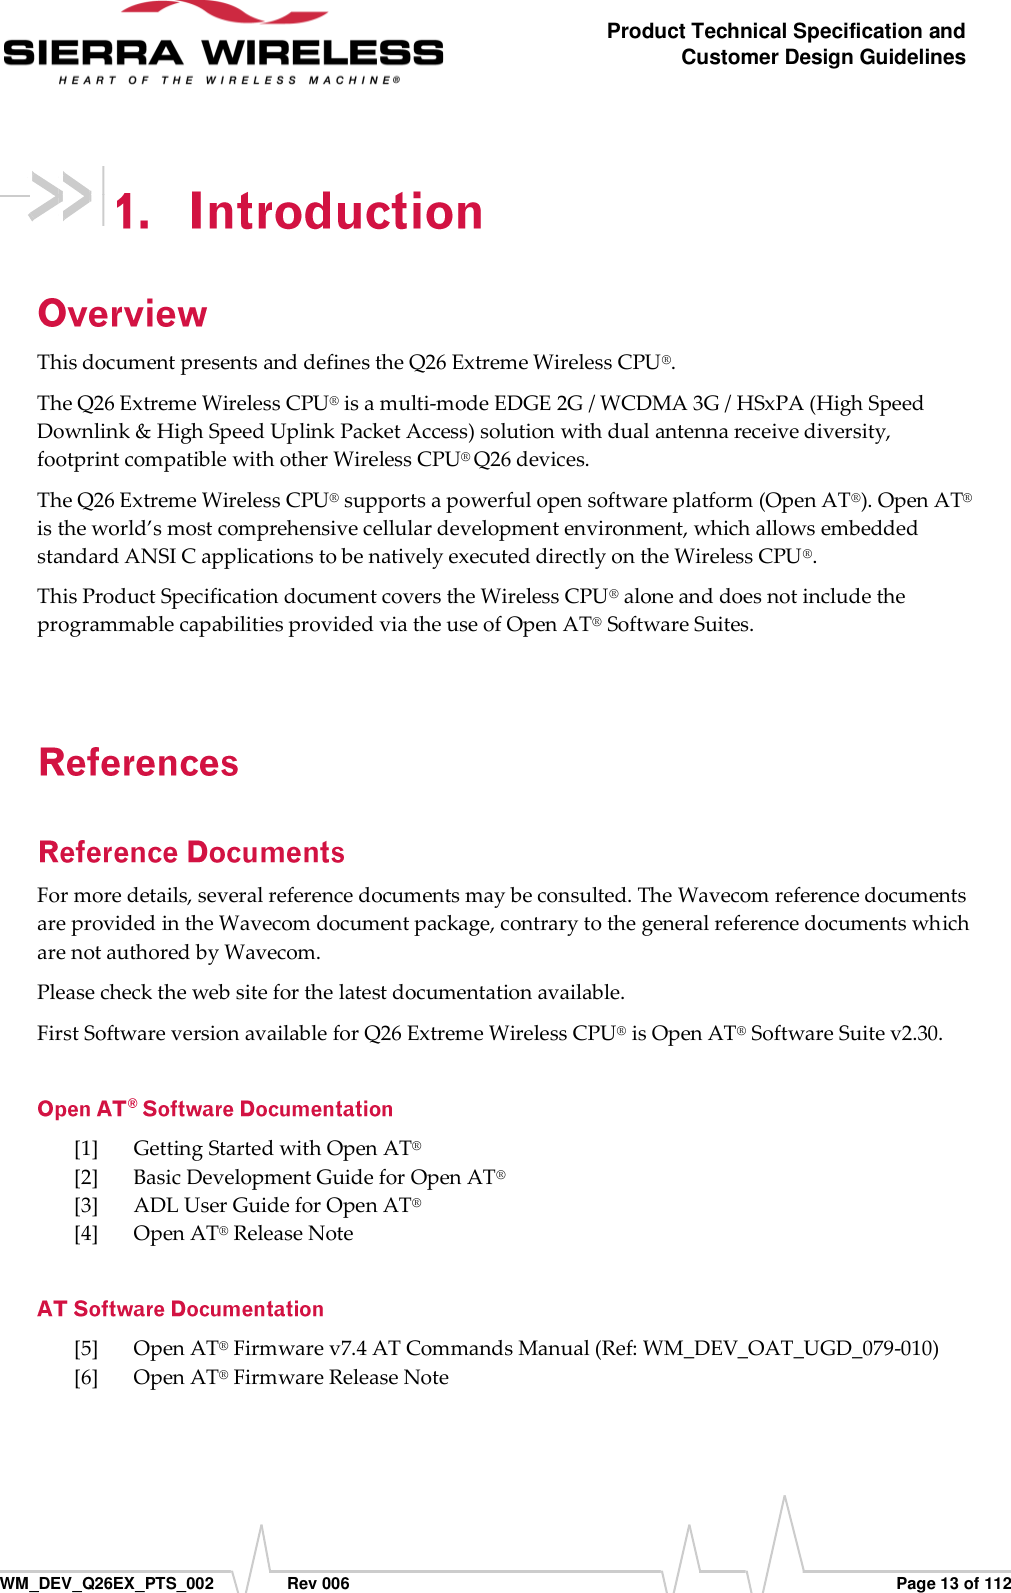      WM_DEV_Q26EX_PTS_002  Rev 006  Page 13 of 112 Product Technical Specification and Customer Design Guidelines  This document presents and defines the Q26 Extreme Wireless CPU®.  The Q26 Extreme Wireless CPU® is a multi-mode EDGE 2G / WCDMA 3G / HSxPA (High Speed Downlink &amp; High Speed Uplink Packet Access) solution with dual antenna receive diversity, footprint compatible with other Wireless CPU® Q26 devices. The Q26 Extreme Wireless CPU® supports a powerful open software platform (Open AT®). Open AT® is the world’s most comprehensive cellular development environment, which allows embedded standard ANSI C applications to be natively executed directly on the Wireless CPU®. This Product Specification document covers the Wireless CPU® alone and does not include the programmable capabilities provided via the use of Open AT® Software Suites. For more details, several reference documents may be consulted. The Wavecom reference documents are provided in the Wavecom document package, contrary to the general reference documents which are not authored by Wavecom. Please check the web site for the latest documentation available.  First Software version available for Q26 Extreme Wireless CPU® is Open AT® Software Suite v2.30. [1] Getting Started with Open AT® [2] Basic Development Guide for Open AT® [3] ADL User Guide for Open AT® [4] Open AT® Release Note [5] Open AT® Firmware v7.4 AT Commands Manual (Ref: WM_DEV_OAT_UGD_079-010) [6] Open AT® Firmware Release Note 